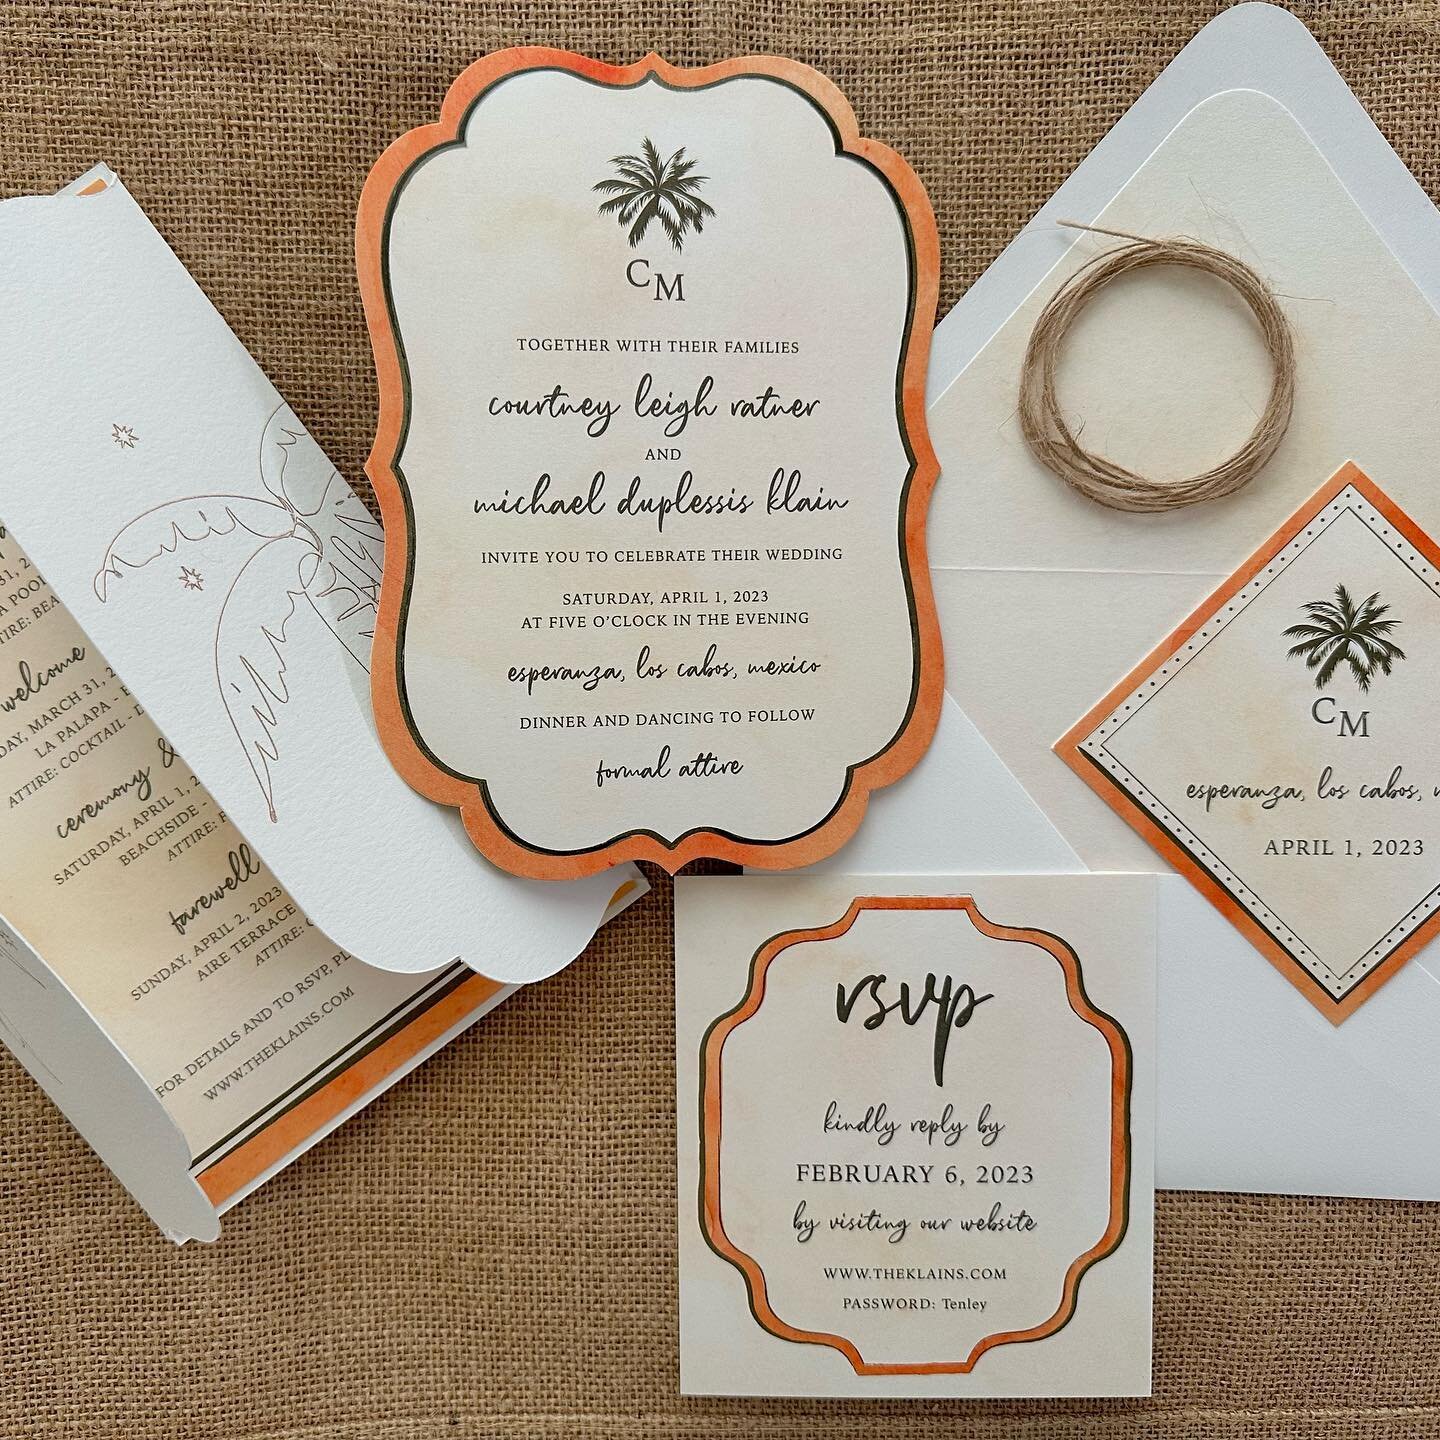 So excited to share Courtney and Mike&rsquo;s beautiful invitation suite. The trifold enclosure added a touch of elegance and provided plenty of space for all the important details about the wedding weekend. I love how the design captured the beauty 